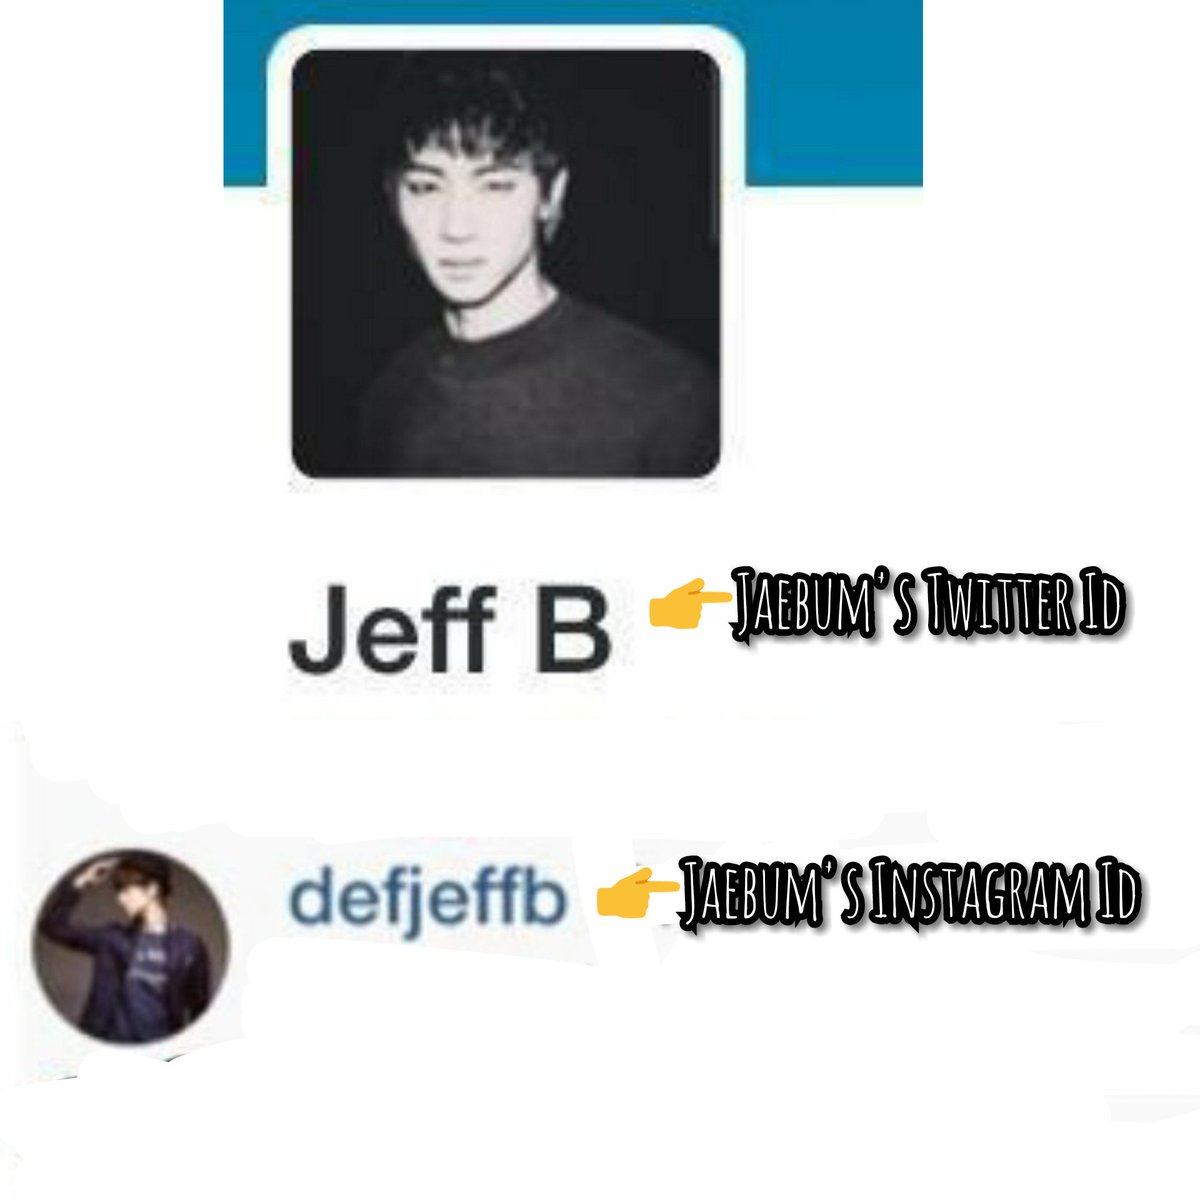 Did you know where JEFF's name came from? Before GOT7's debut Jackson gave him that name and Jaebeom began using it on his social media accounts. Did you like your name?!